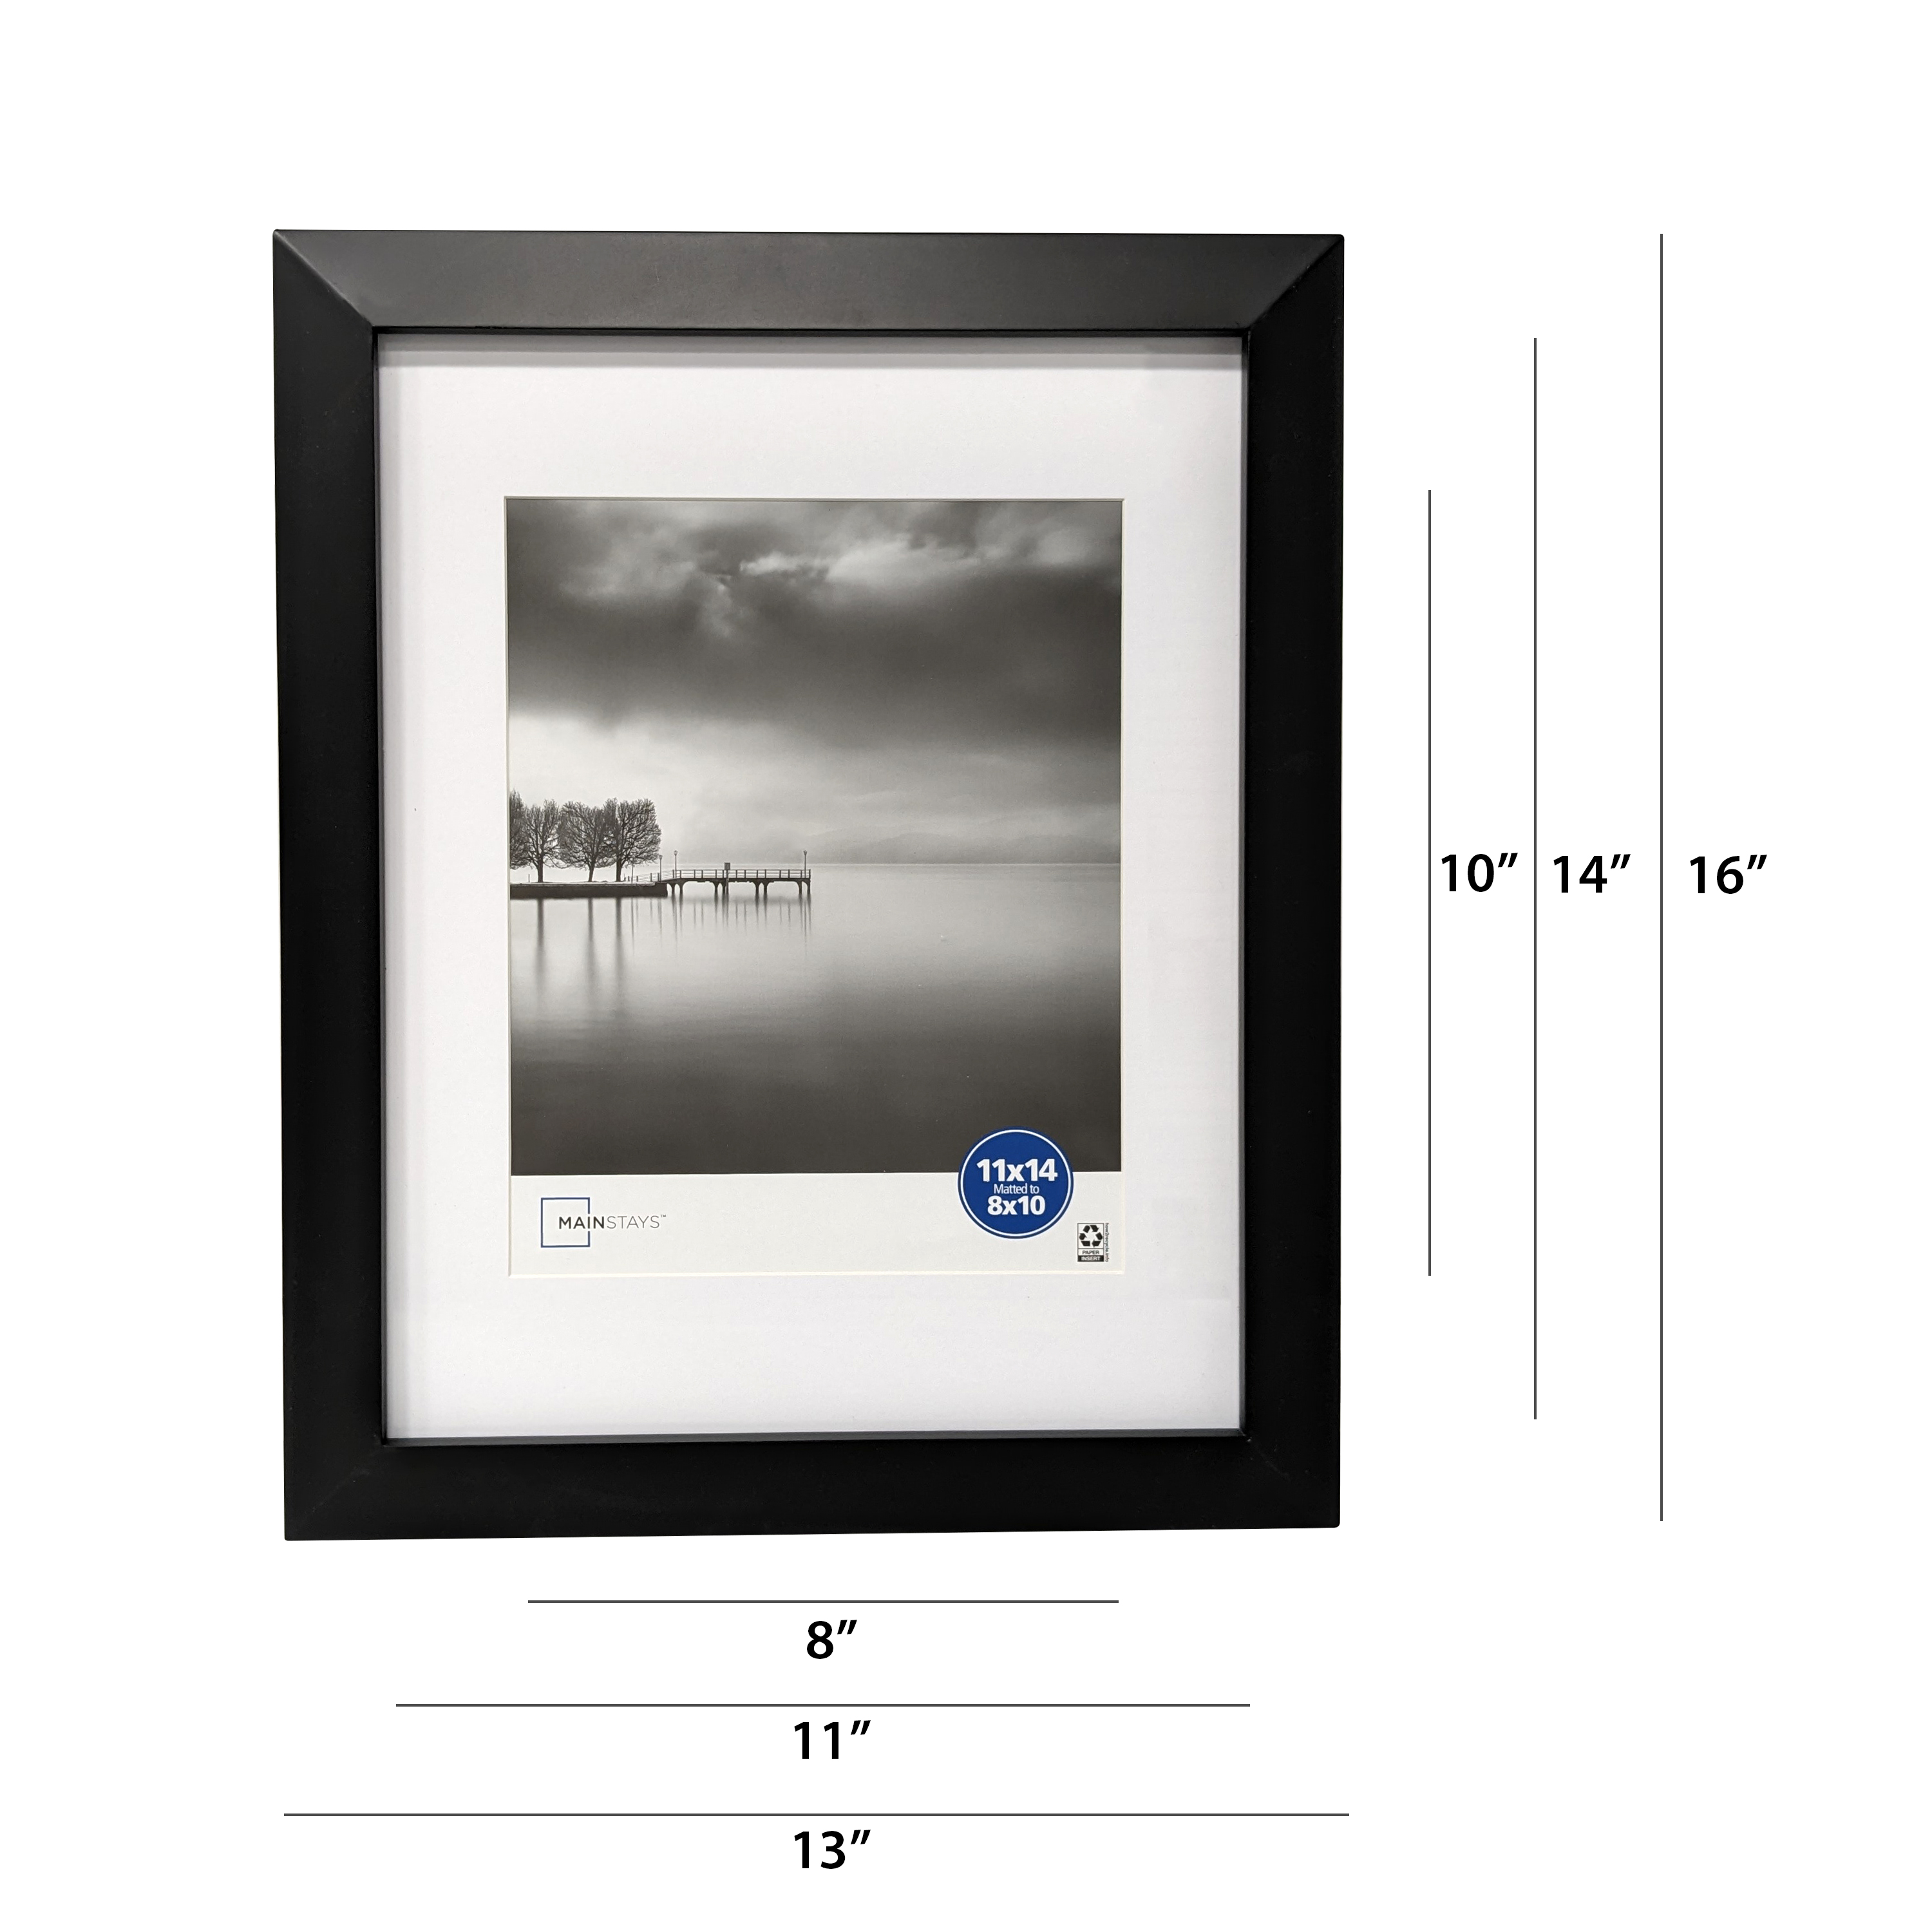 Mainstays 11x14 Matted to 8x10 Wide Beveled Tabletop Picture Frame, Black - image 2 of 7